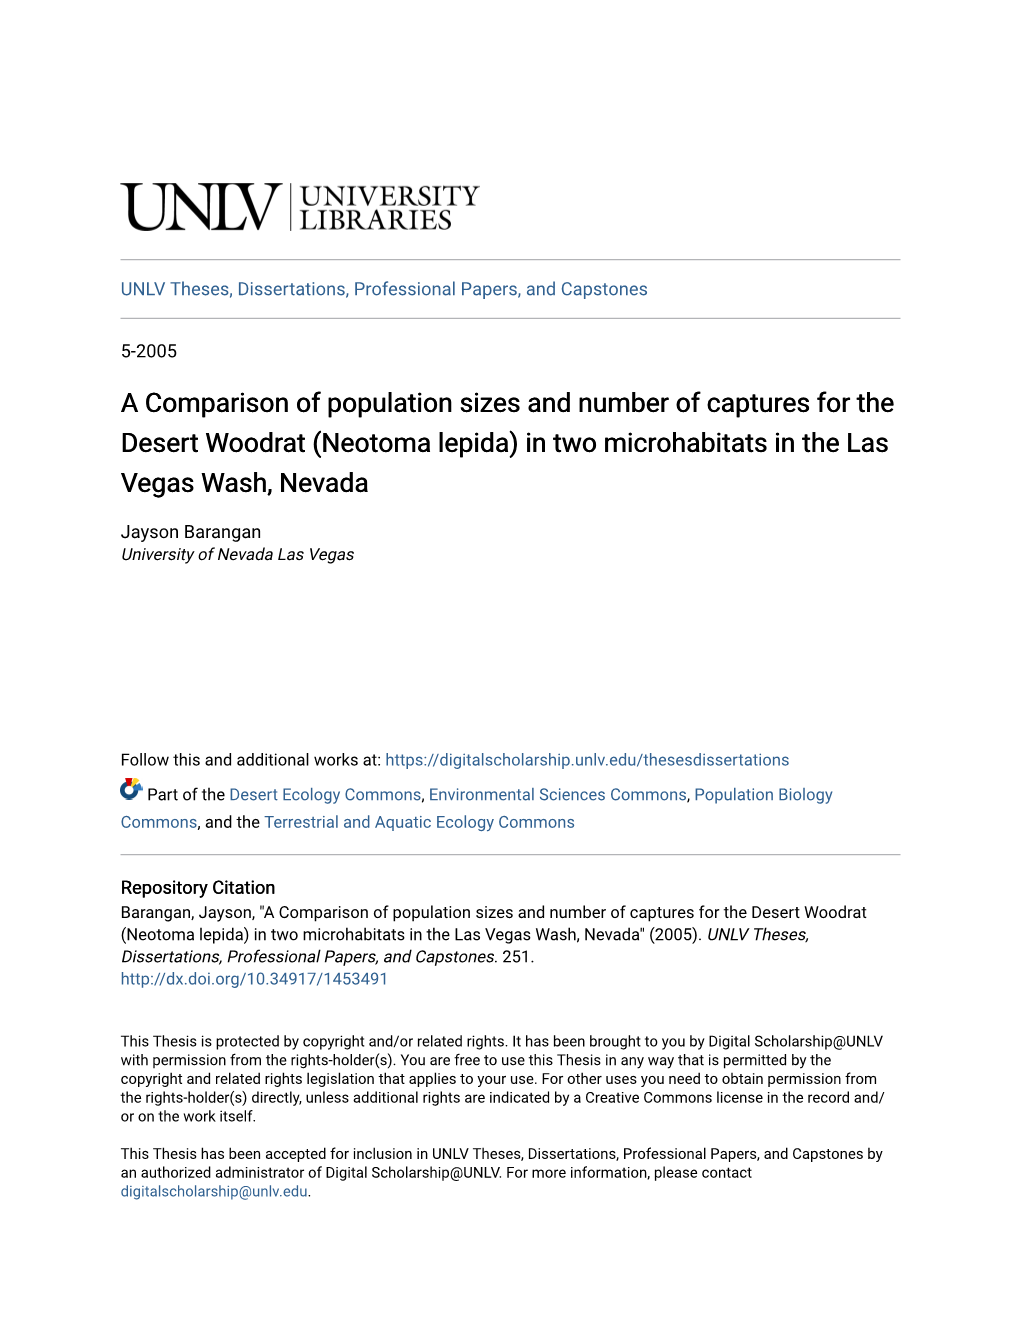 A Comparison of Population Sizes and Number of Captures for the Desert Woodrat (Neotoma Lepida) in Two Microhabitats in the Las Vegas Wash, Nevada